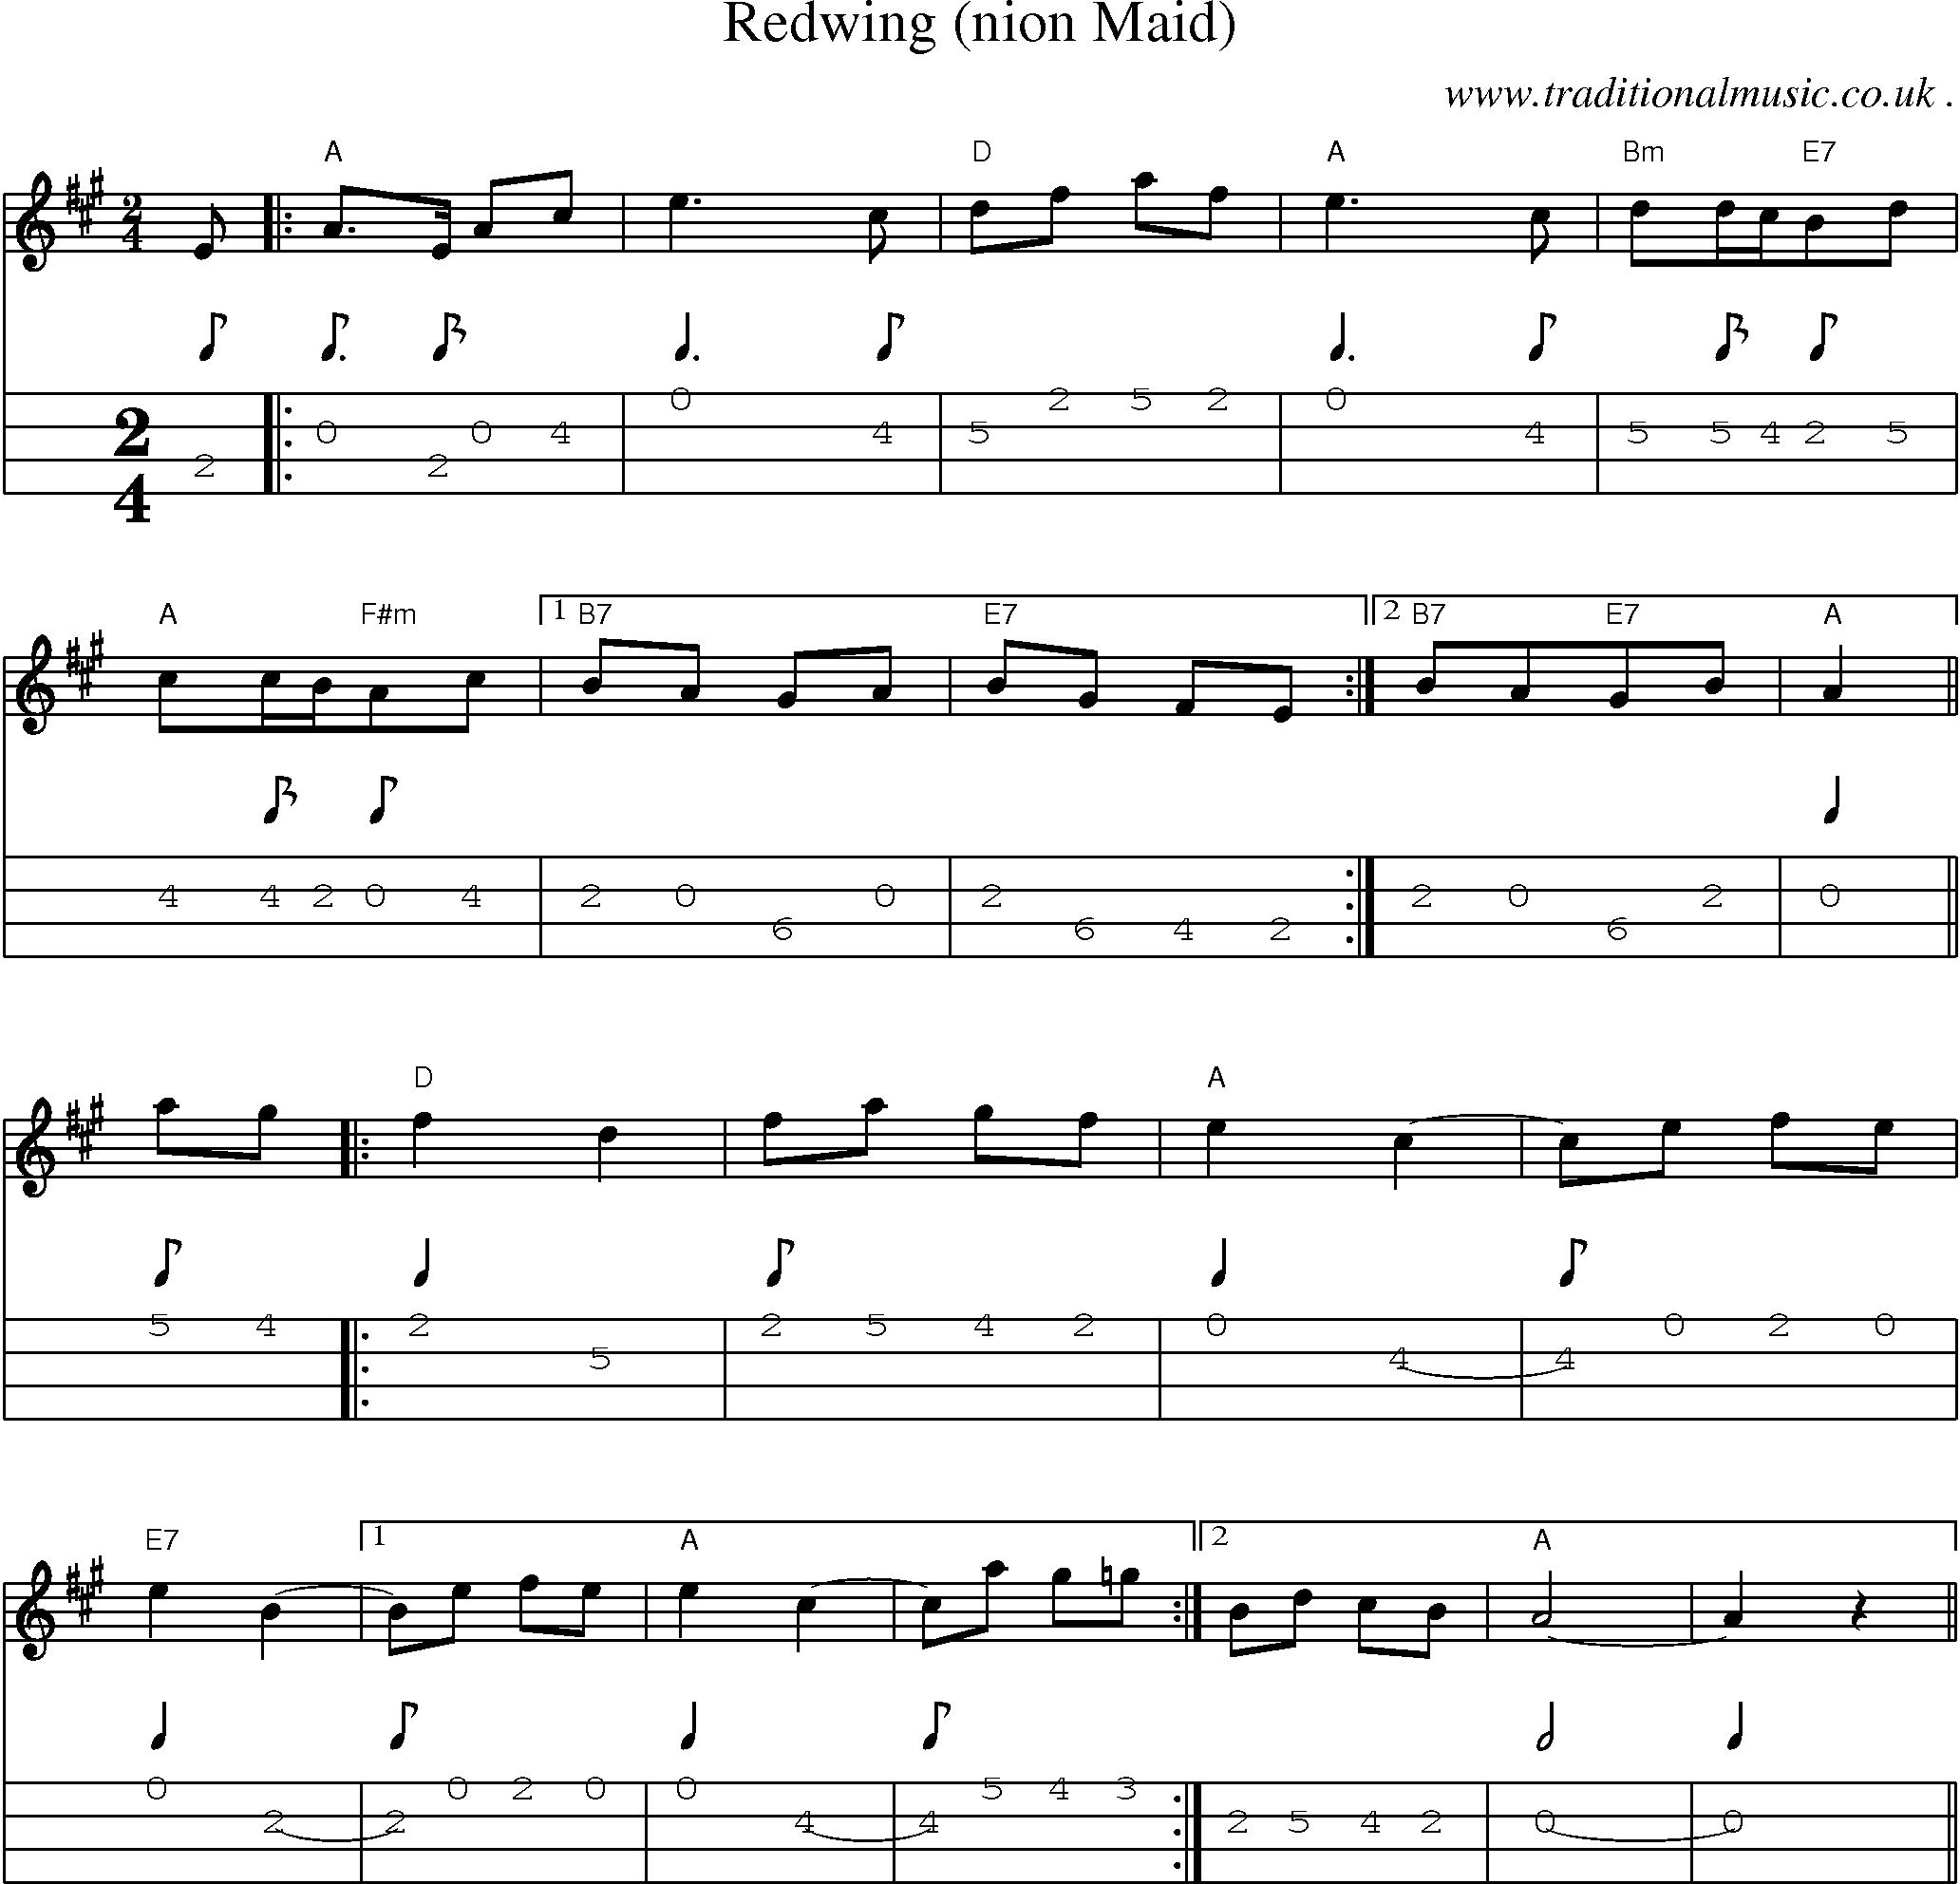 Sheet-Music and Mandolin Tabs for Redwing (nion Maid)